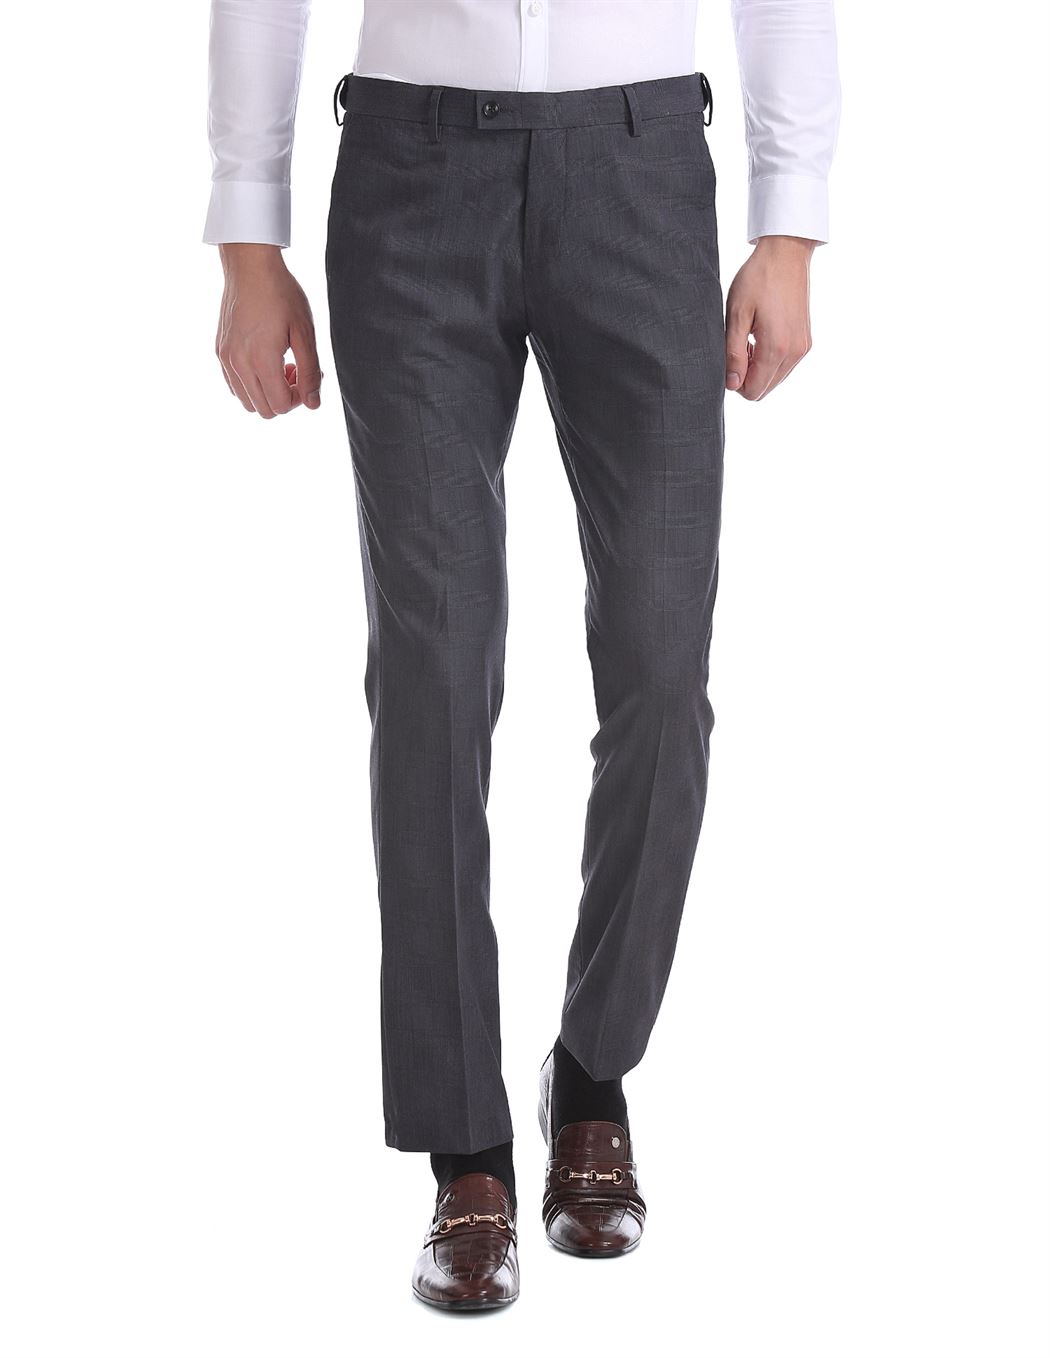 TWILL COTTON Multicolor Men Formal Pants at Rs 265/piece in Ludhiana | ID:  2850030637112